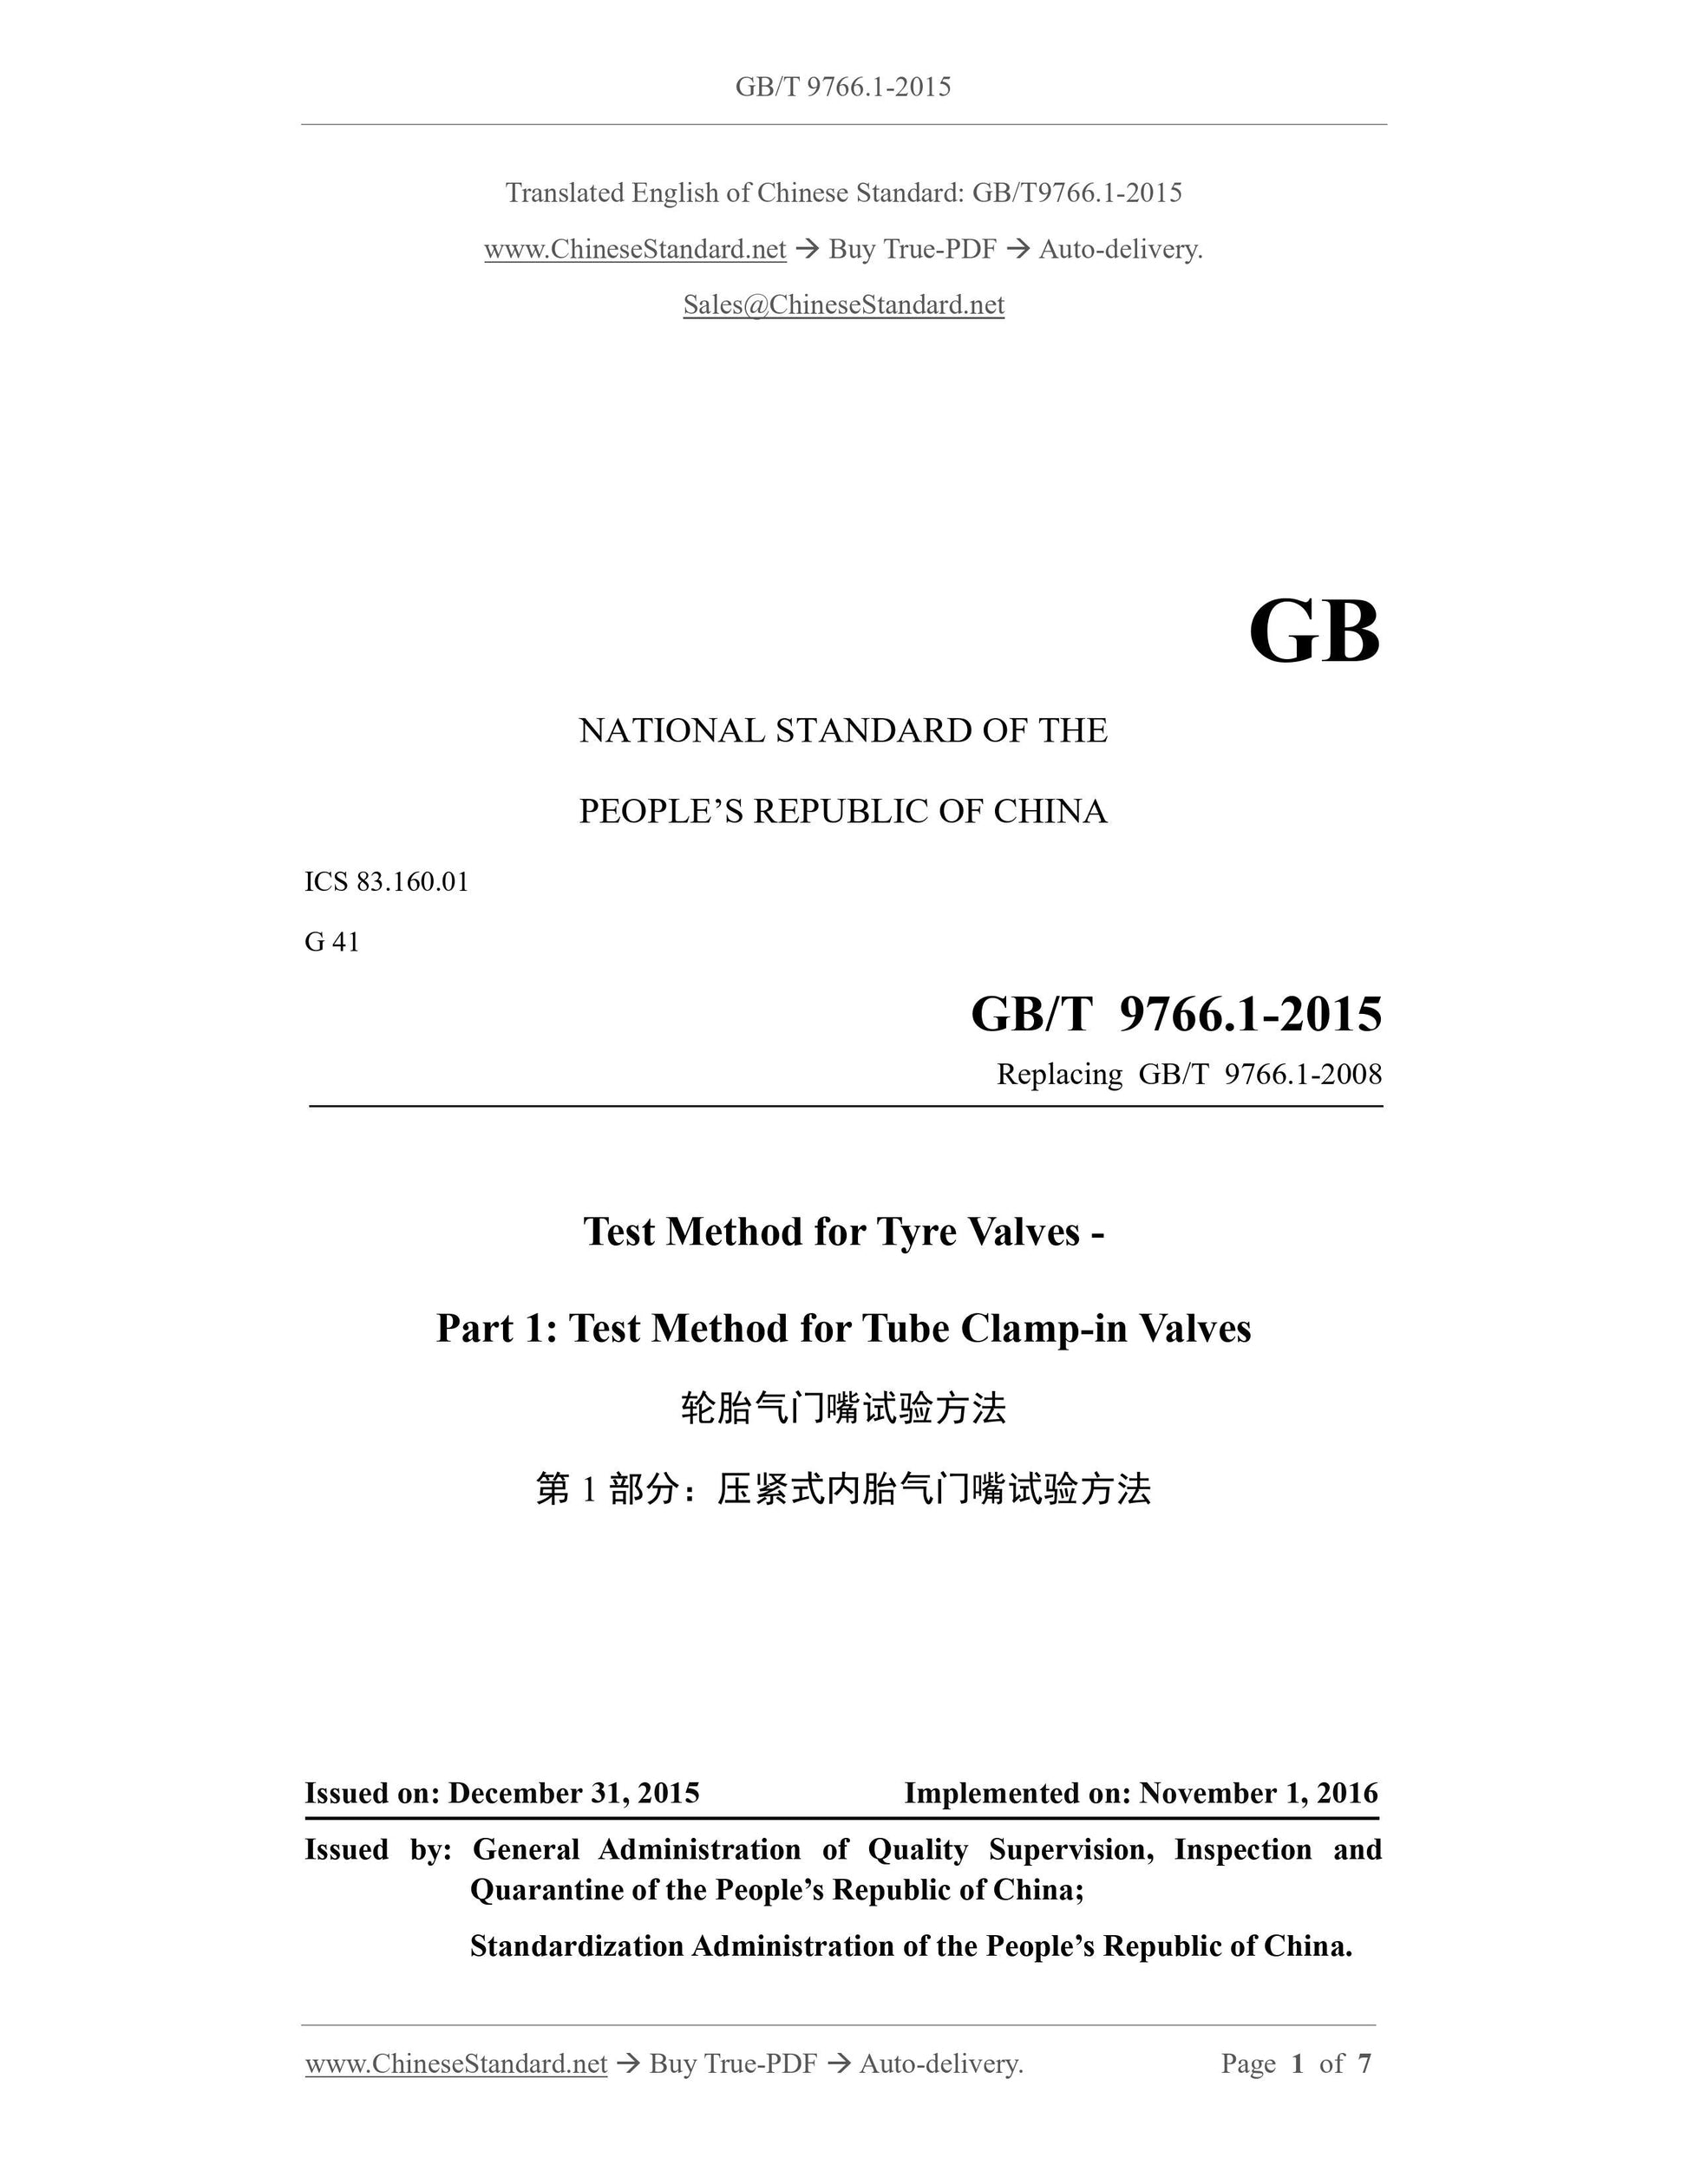 GB/T 9766.1-2015 Page 1